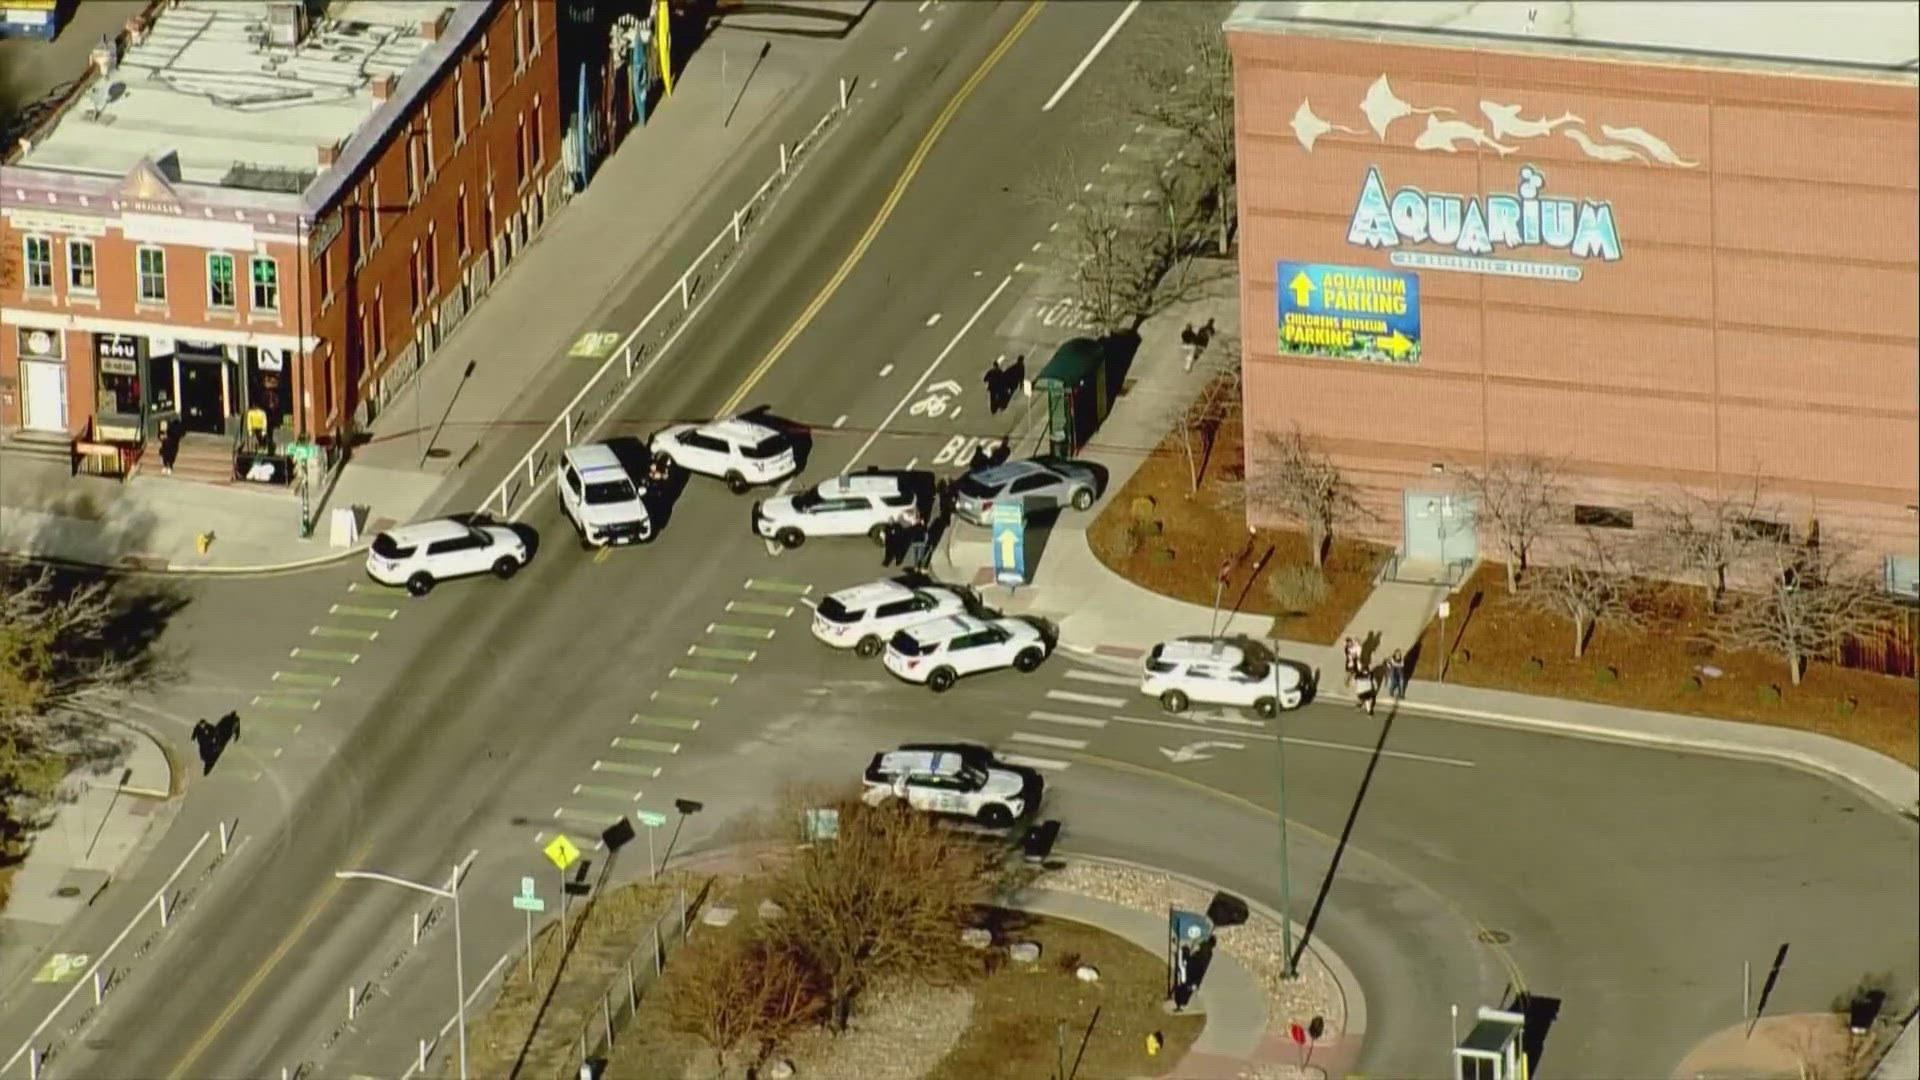 2 teens are charged with first-degree murder in the Feb. 14 fatal shooting of Dacien Salazar outside the aquarium on Water Street in Denver, Colorado.